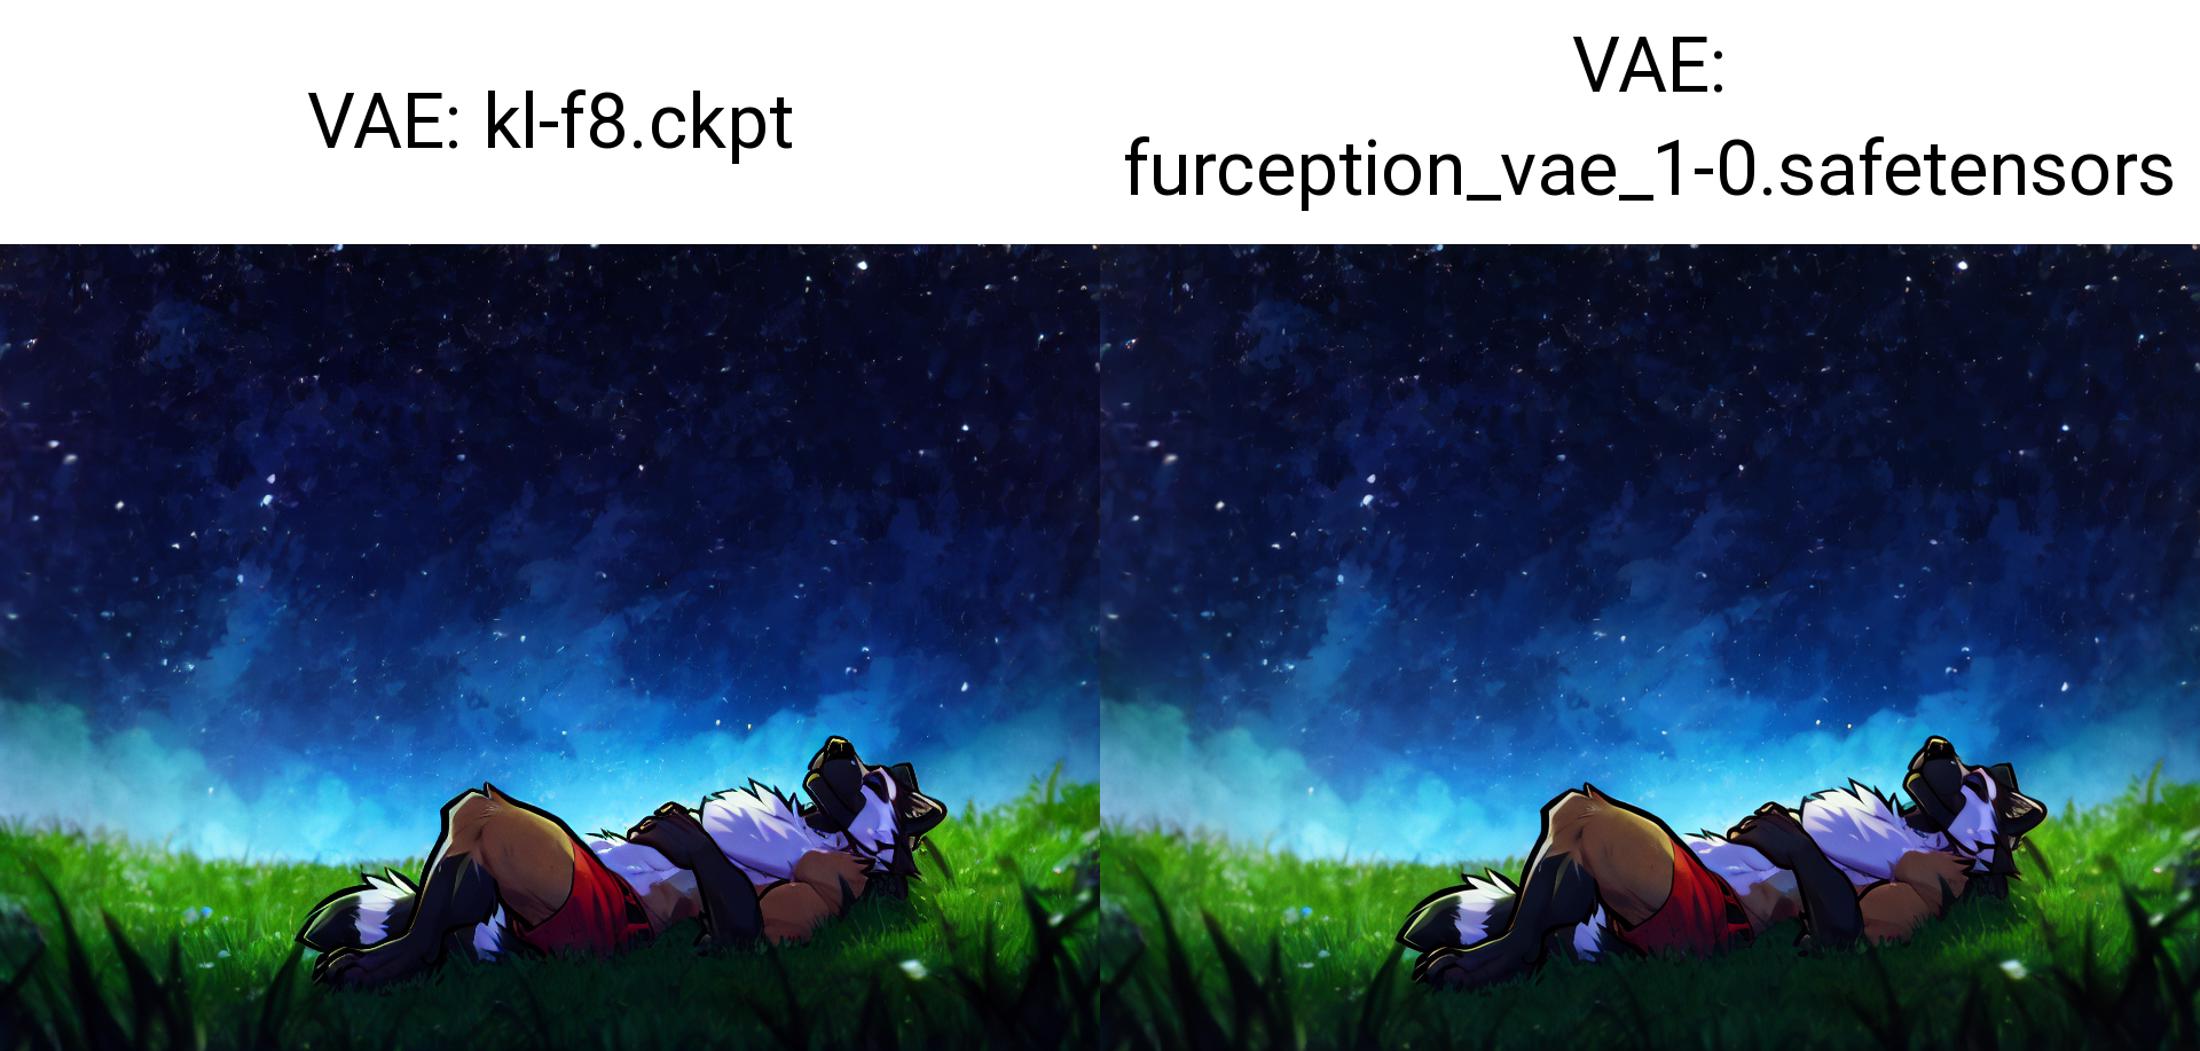 Furception VAE v1.0, by Project RedRocket image by drhead